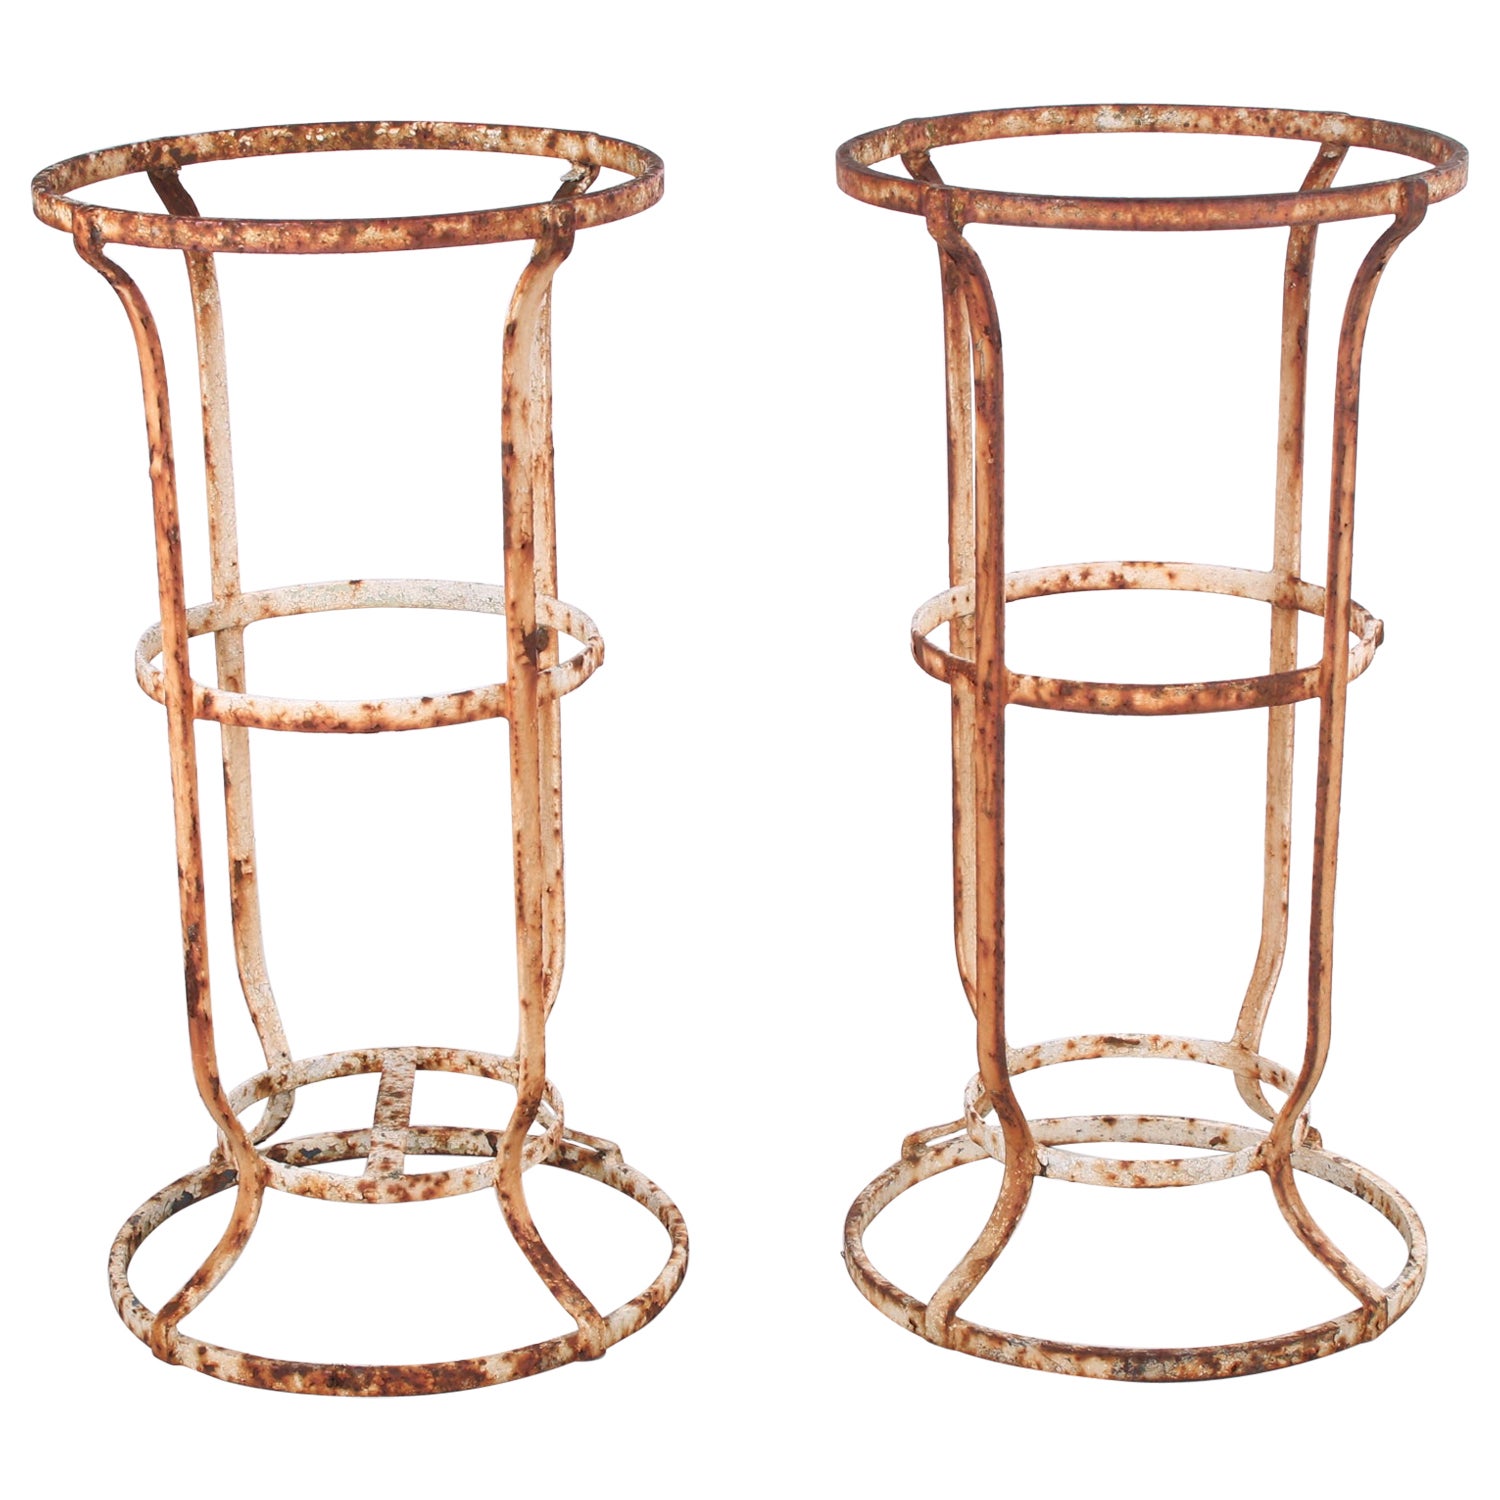 Very Old Wrought Iron French Garden Stand, a Set of 2 with Beautiful Patina